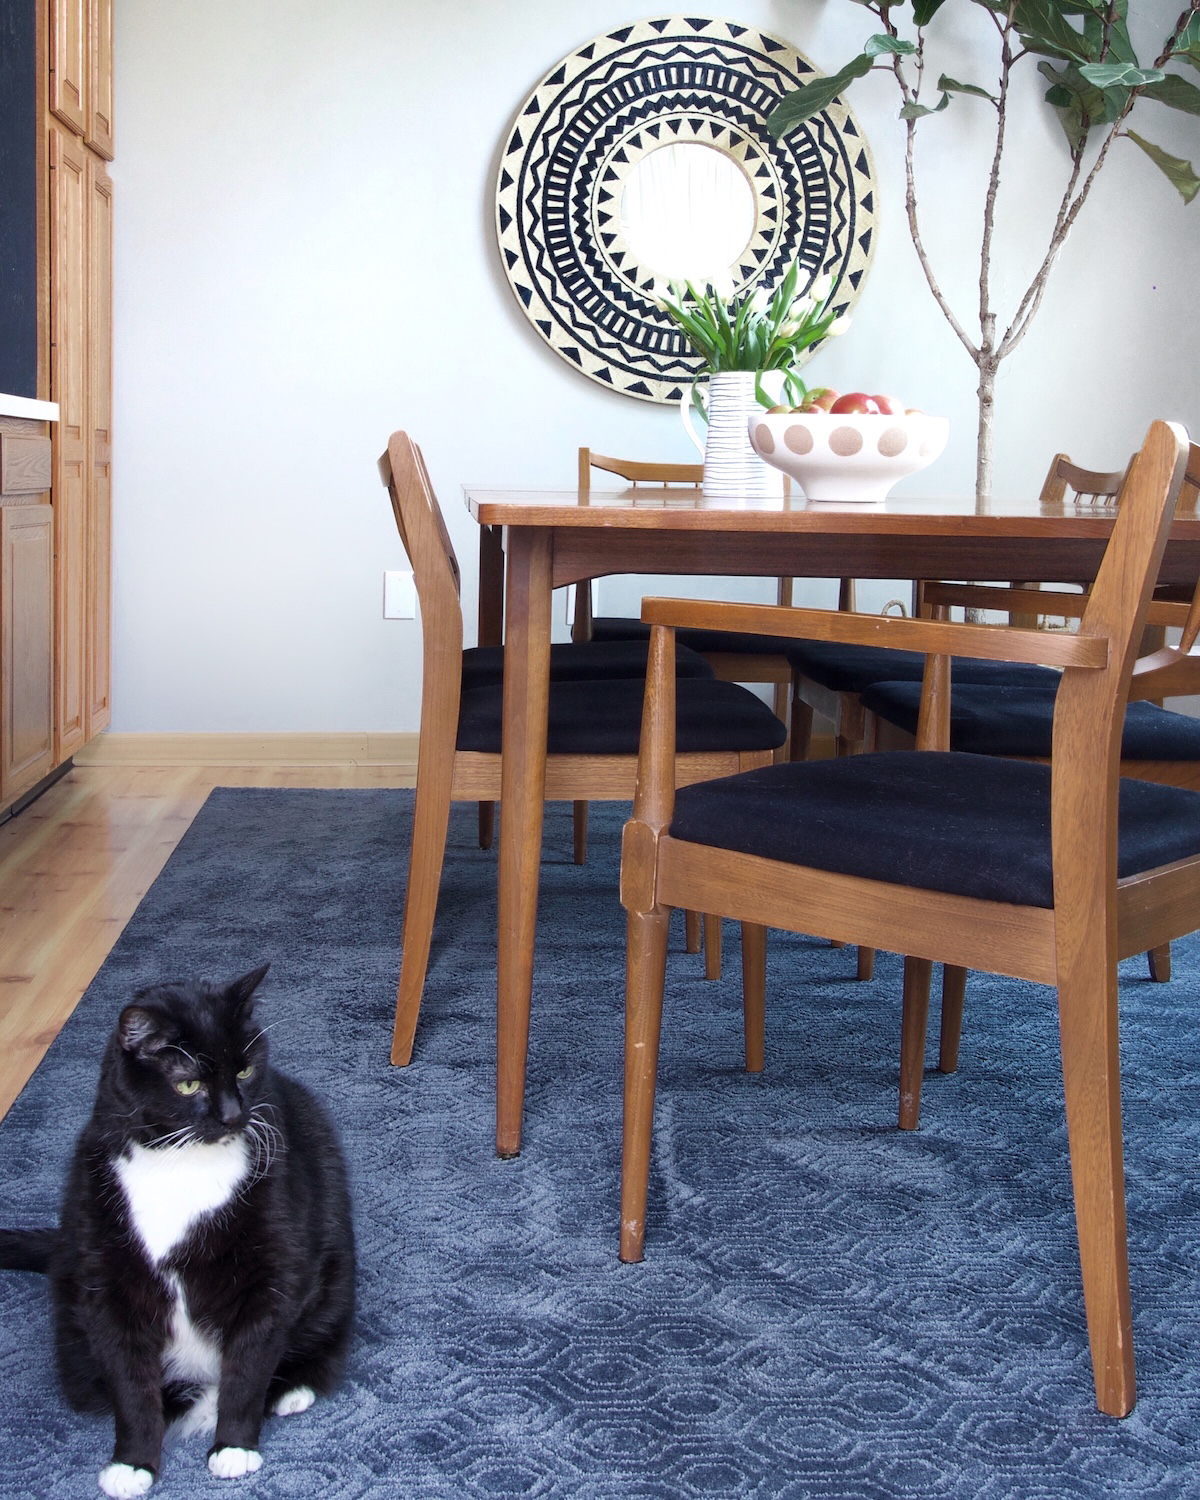 How to Choose a Rug for a Dining Room